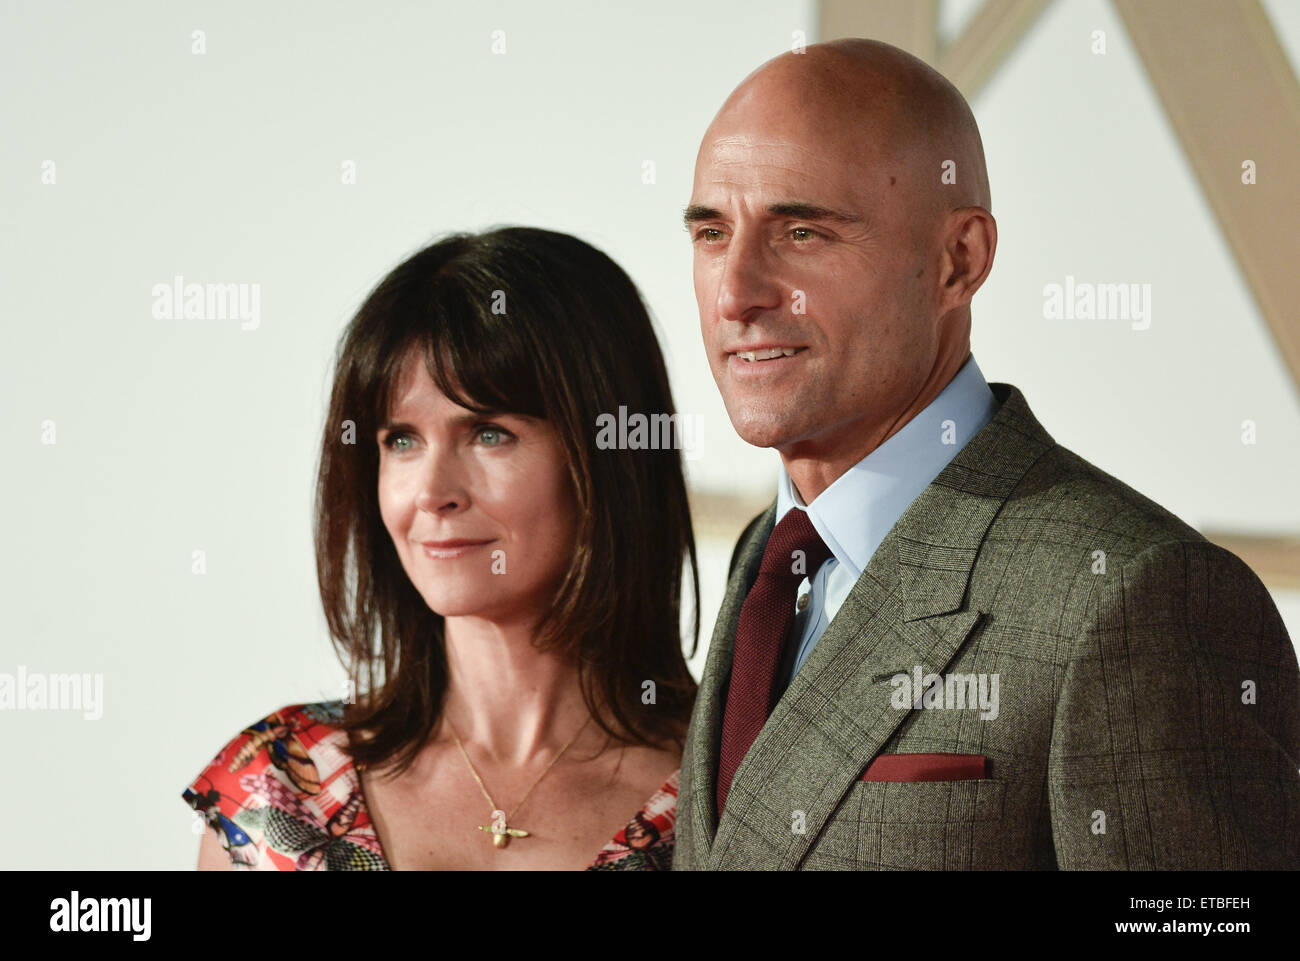 World premiere of the 'Kingsman: The Secret Service' at the Odeon Leicester Square - Arrivals  Featuring: Liza Marshall, Mark Strong Where: London, United Kingdom When: 15 Jan 2015 Credit: Euan Cherry/WENN.com Stock Photo